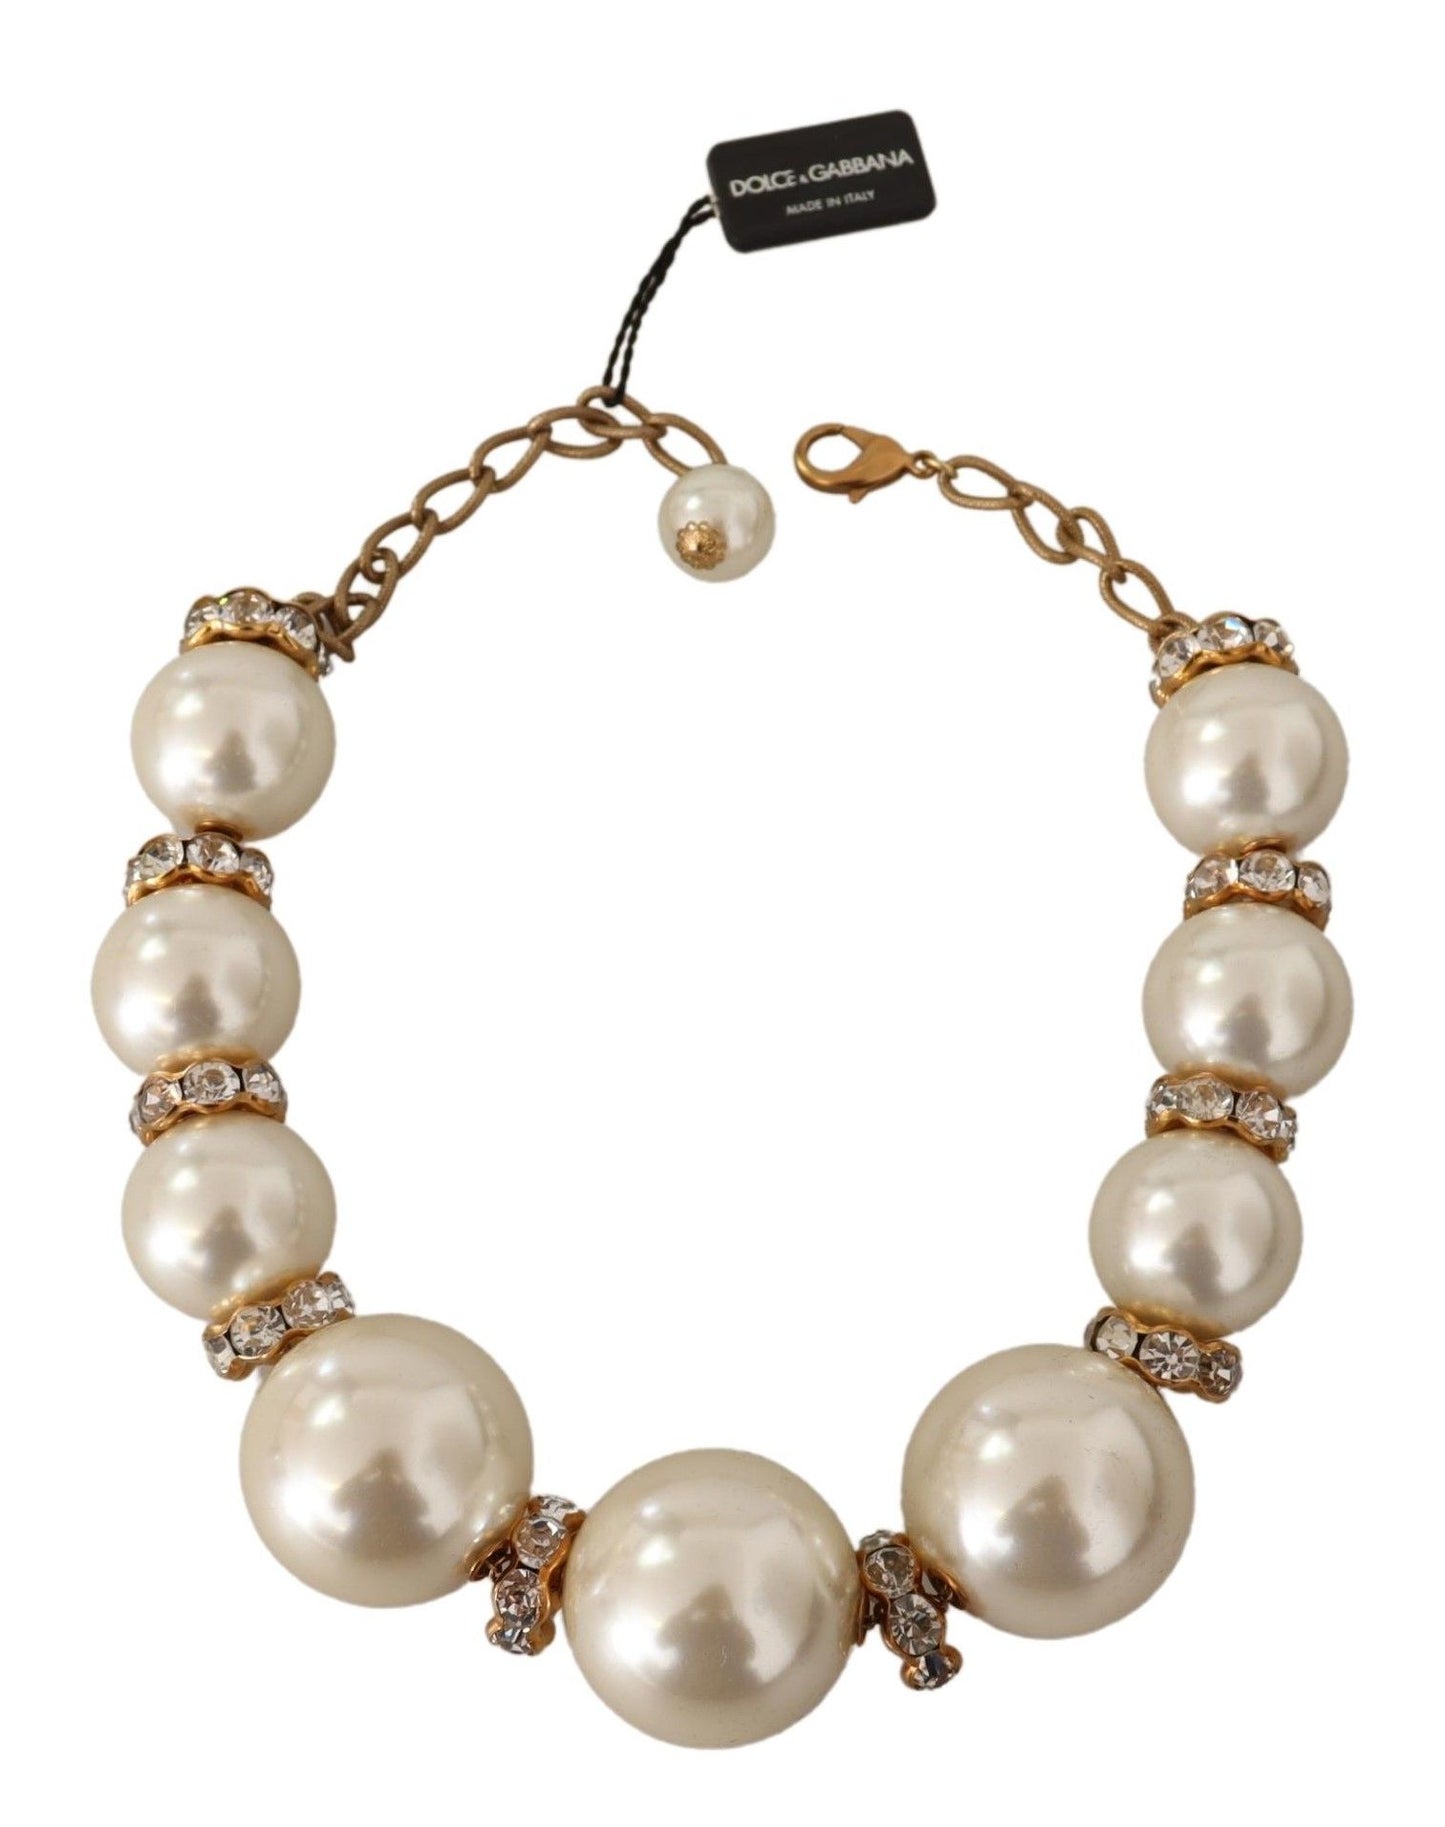 Elegant Faux Pearl Charm Necklace with Crystal Accents